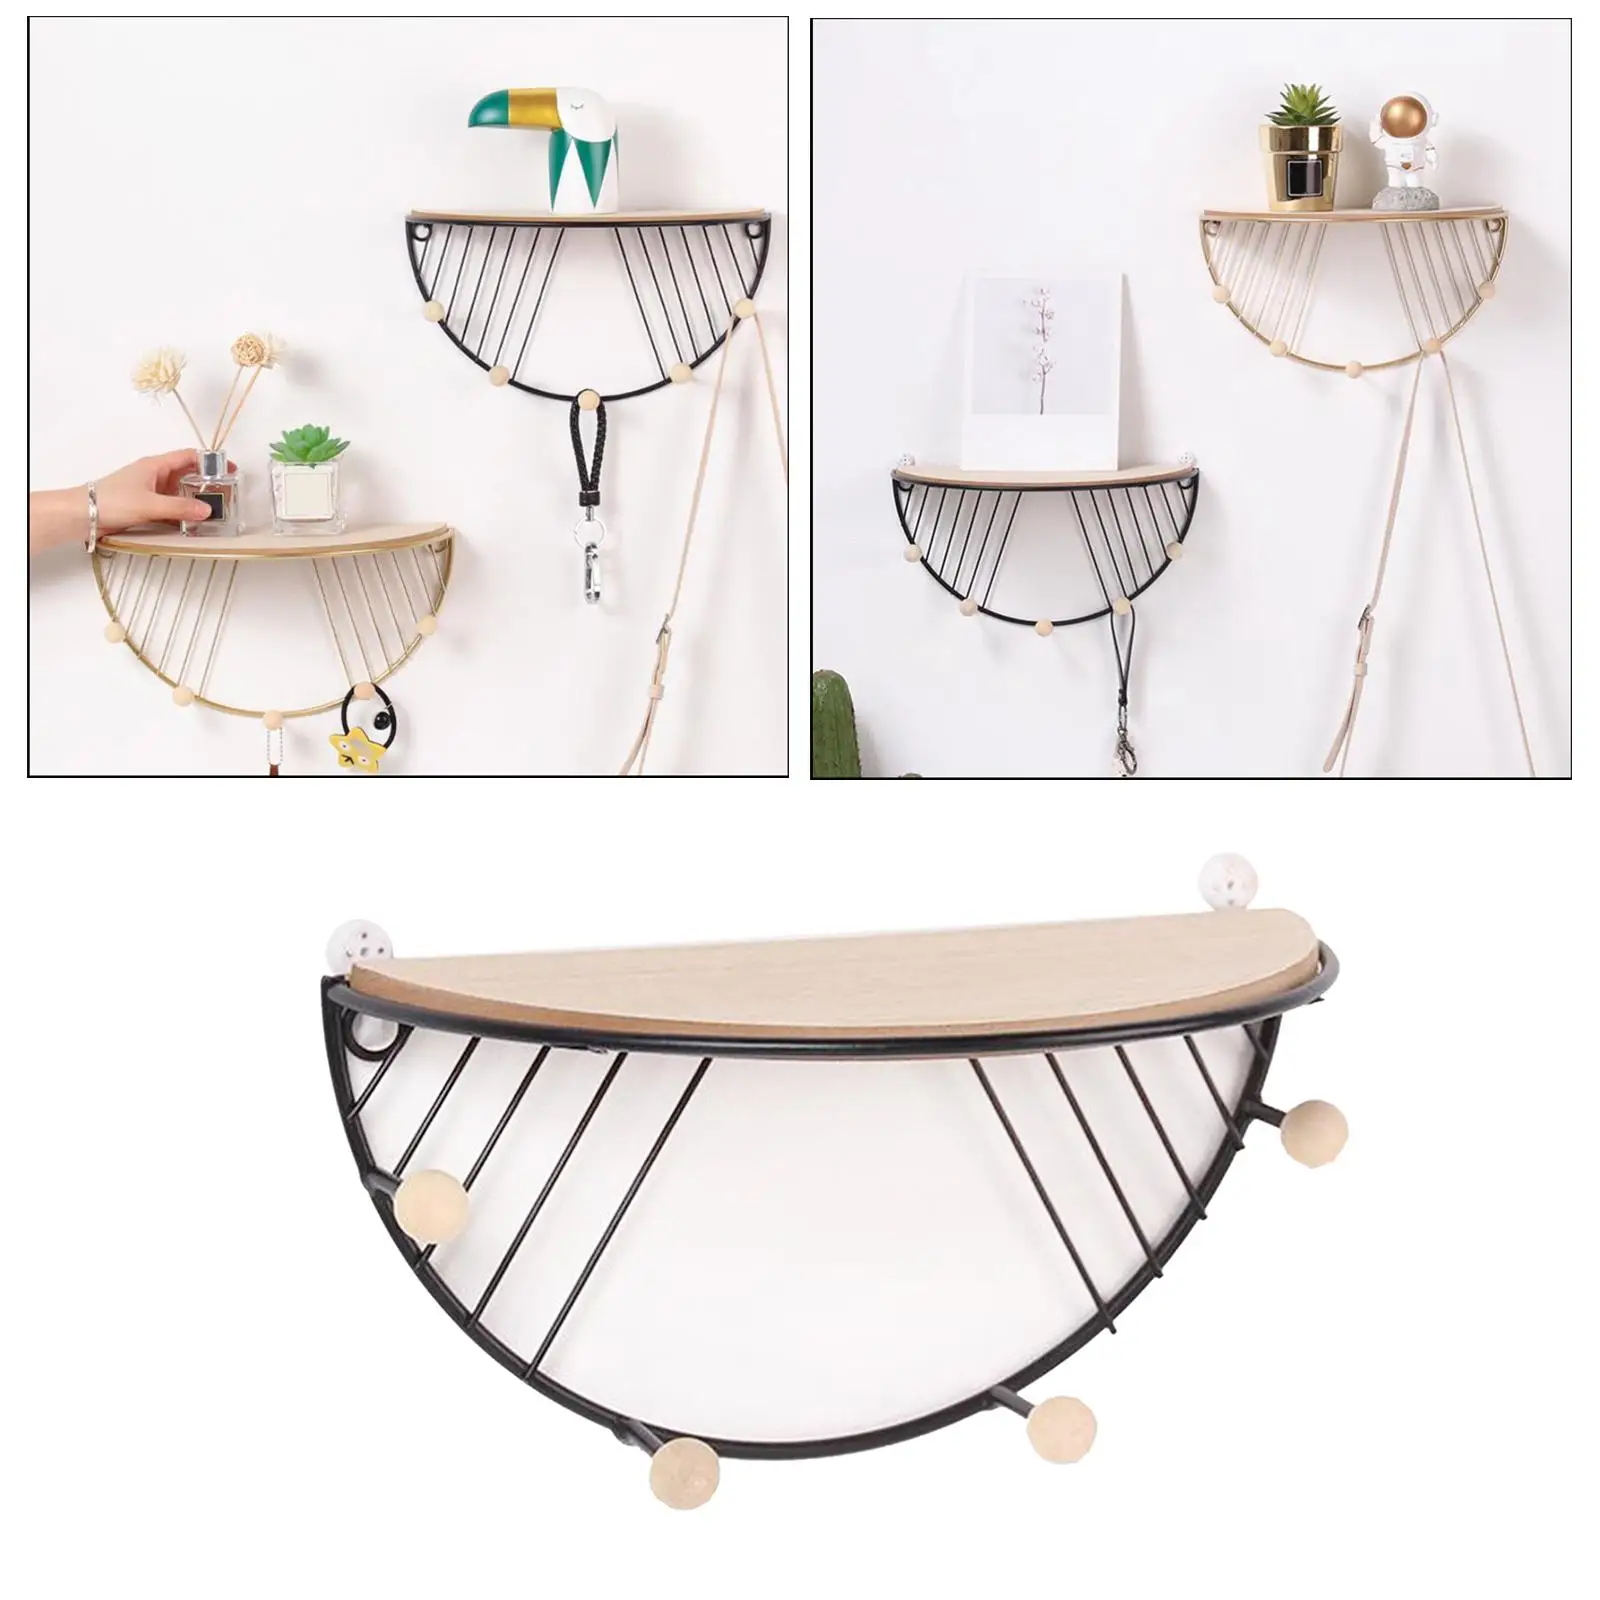 Semicircle Iron Rack Floating Shelves Wall Mounted Storage Shelf w/ er for Home Bedroom Office Decoration Ornament